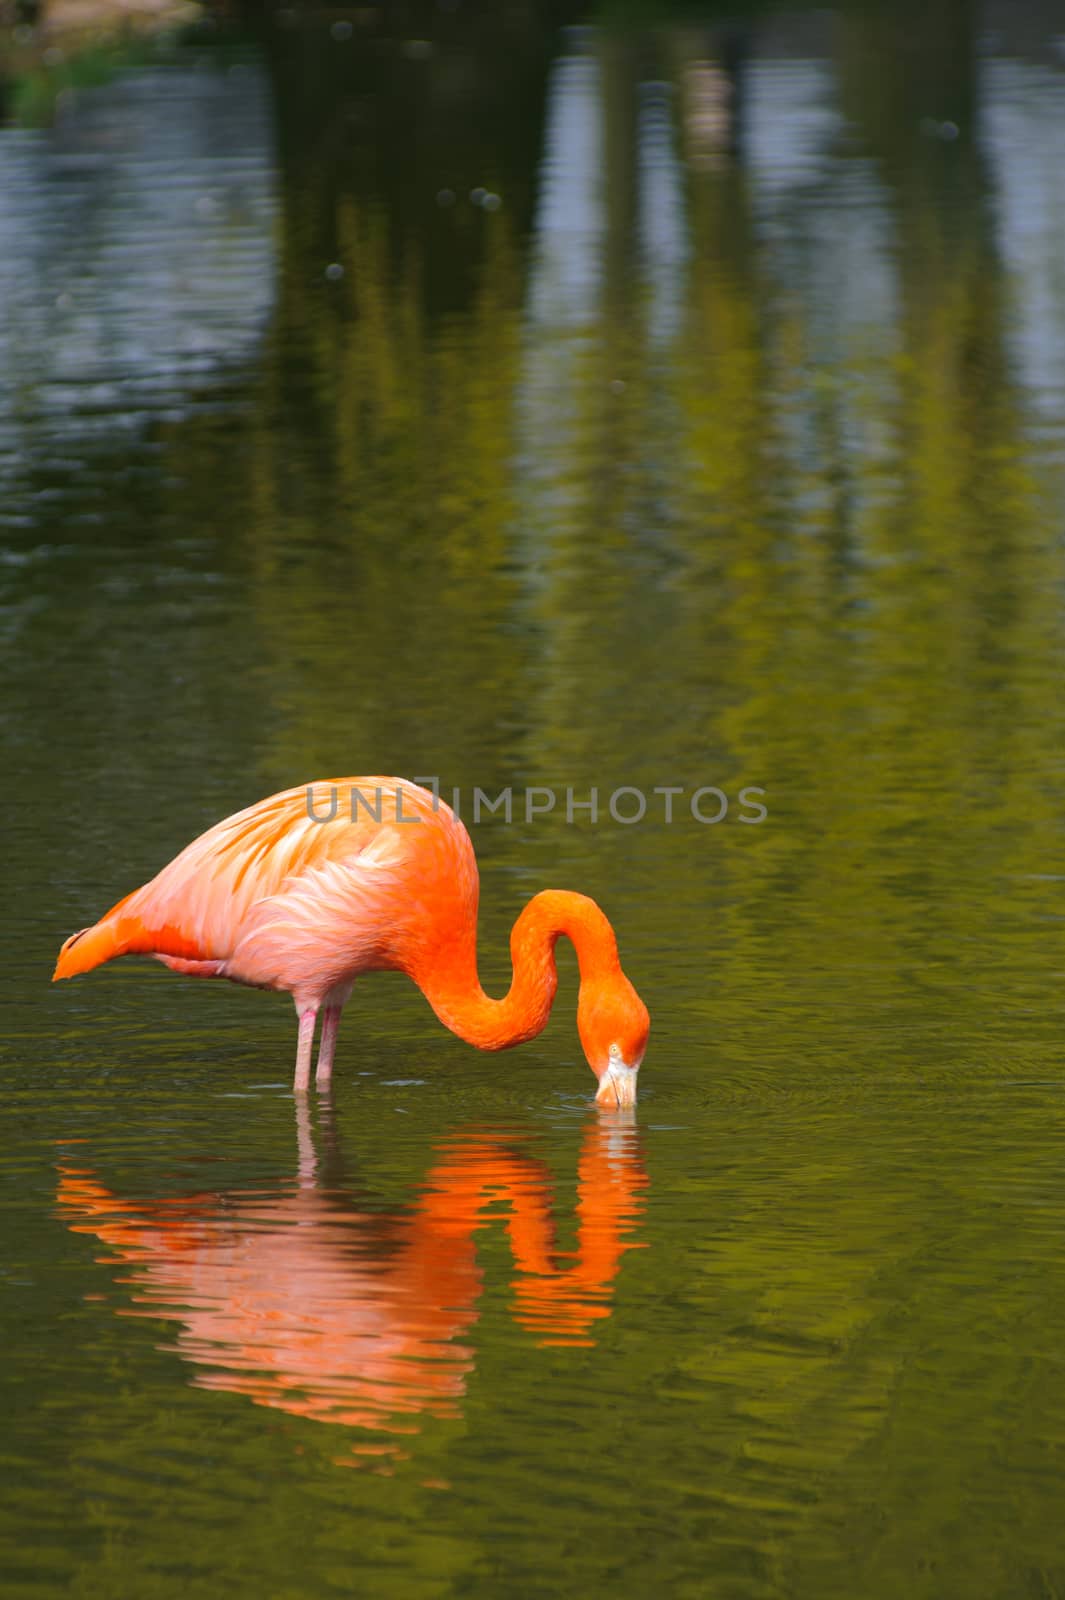 Flamingo feeding with reflection in the water